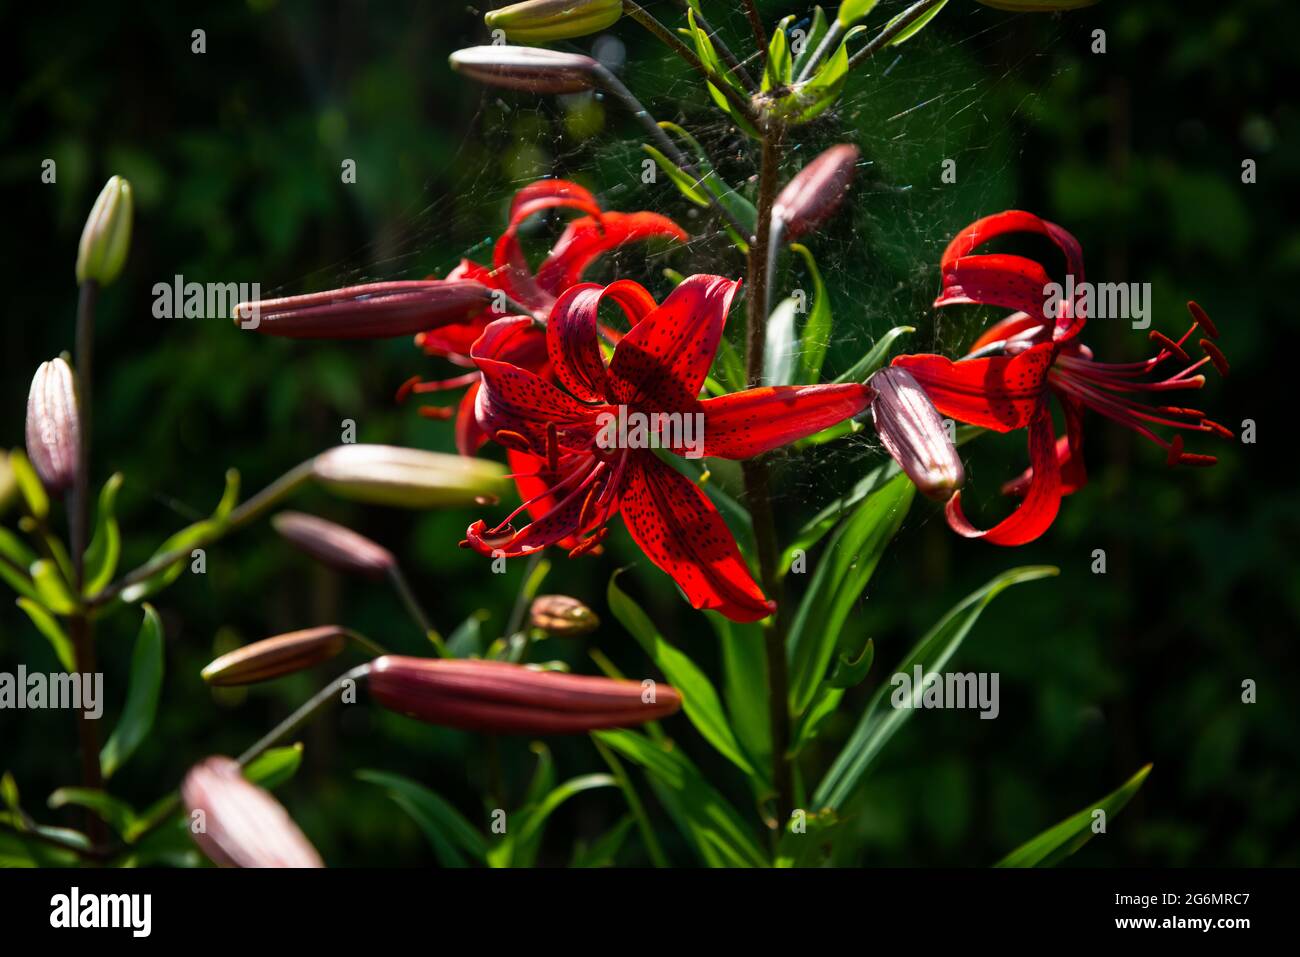 Red lilies bloom in the garden. Close-up of red lilies wrapped in a spider web. Stock Photo